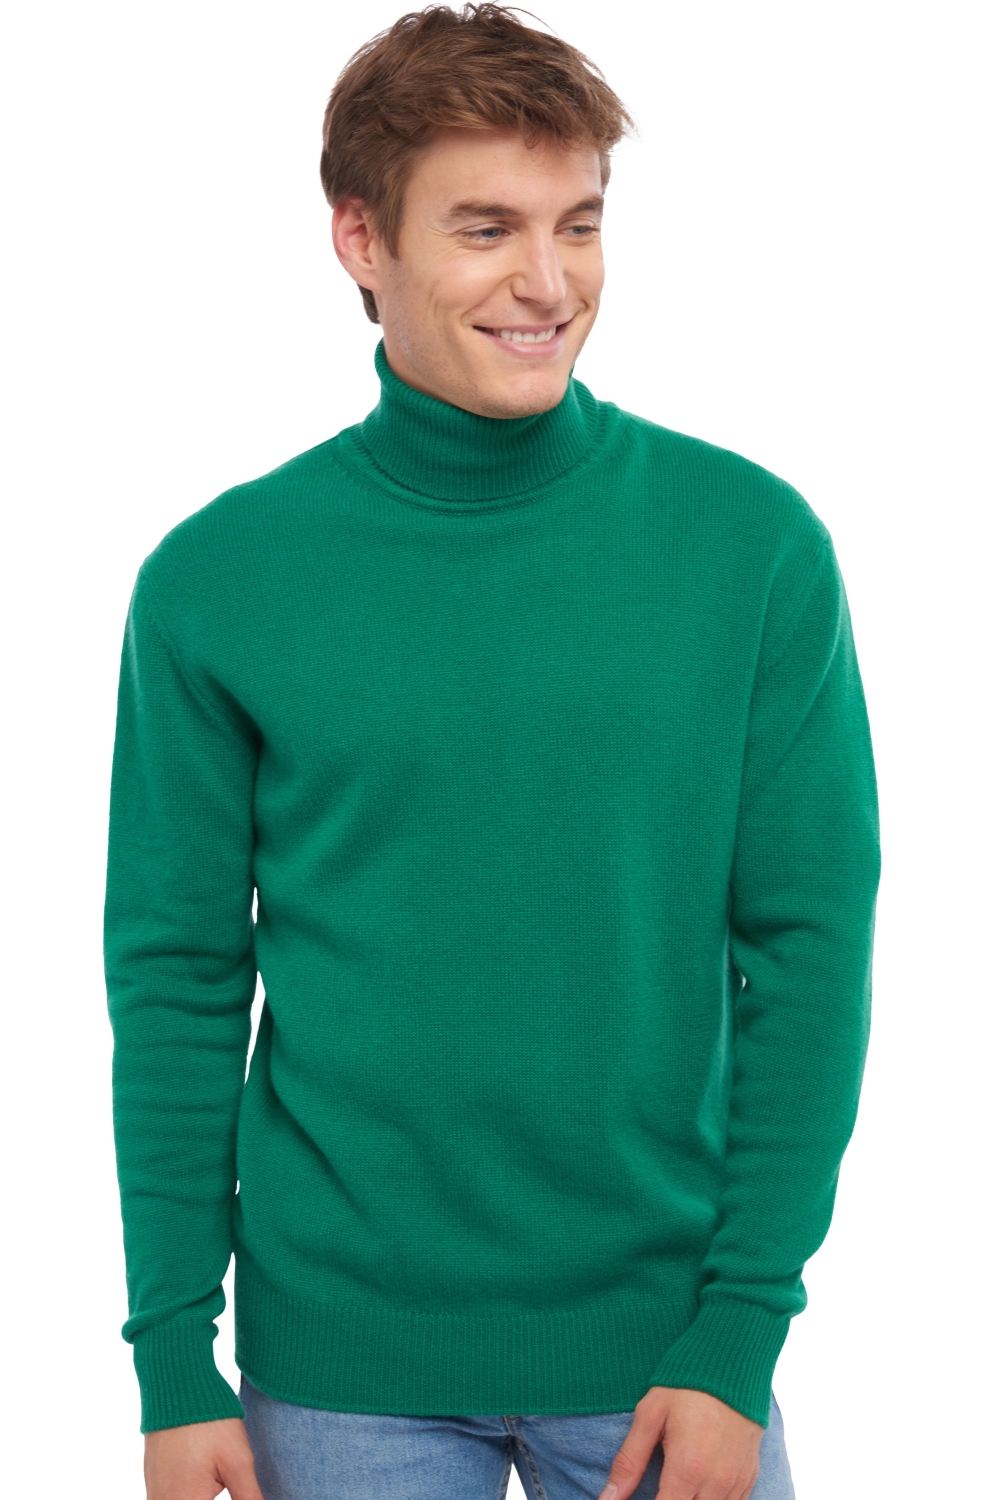 Cachemire pull homme col roule edgar 4f vert anglais s